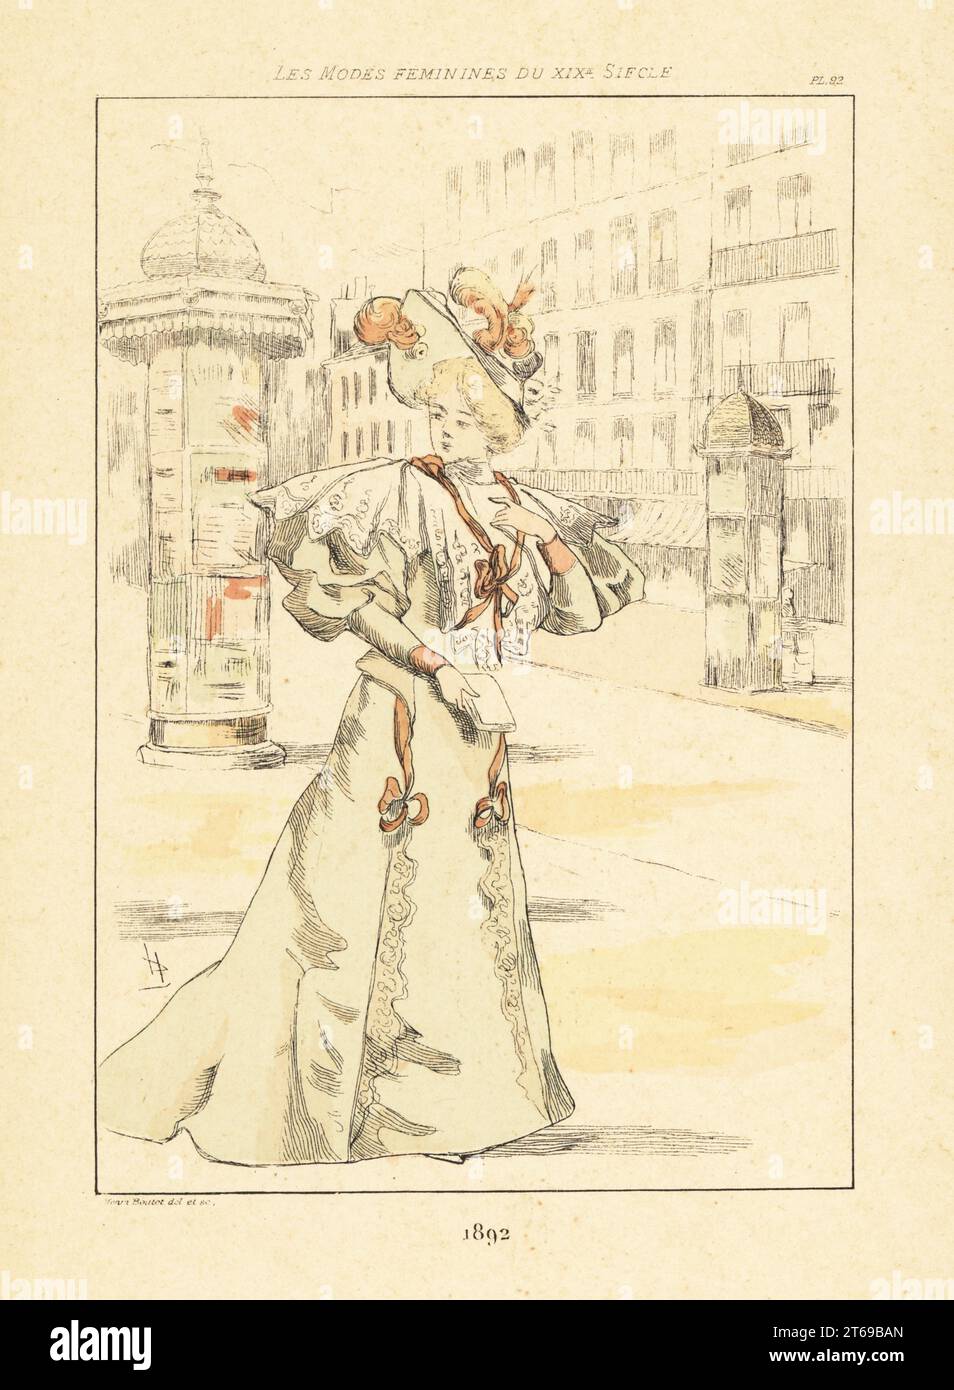 Fashionable woman in front of advertising kiosk, Colonne Morris, Paris, 1892. In bonnet, dress with full sleeves, lace capelet, full skirts, ribbons. Handcoloured drypoint or pointe-seche etching by Henri Boutet from Les Modes Feminines du XIXeme Siecle (Female Fashions of the 19th Century), Ernest Flammarion, Paris, 1902. Boutet (1851-1919) was a French artist, engraver, lithographer and designer. Stock Photo